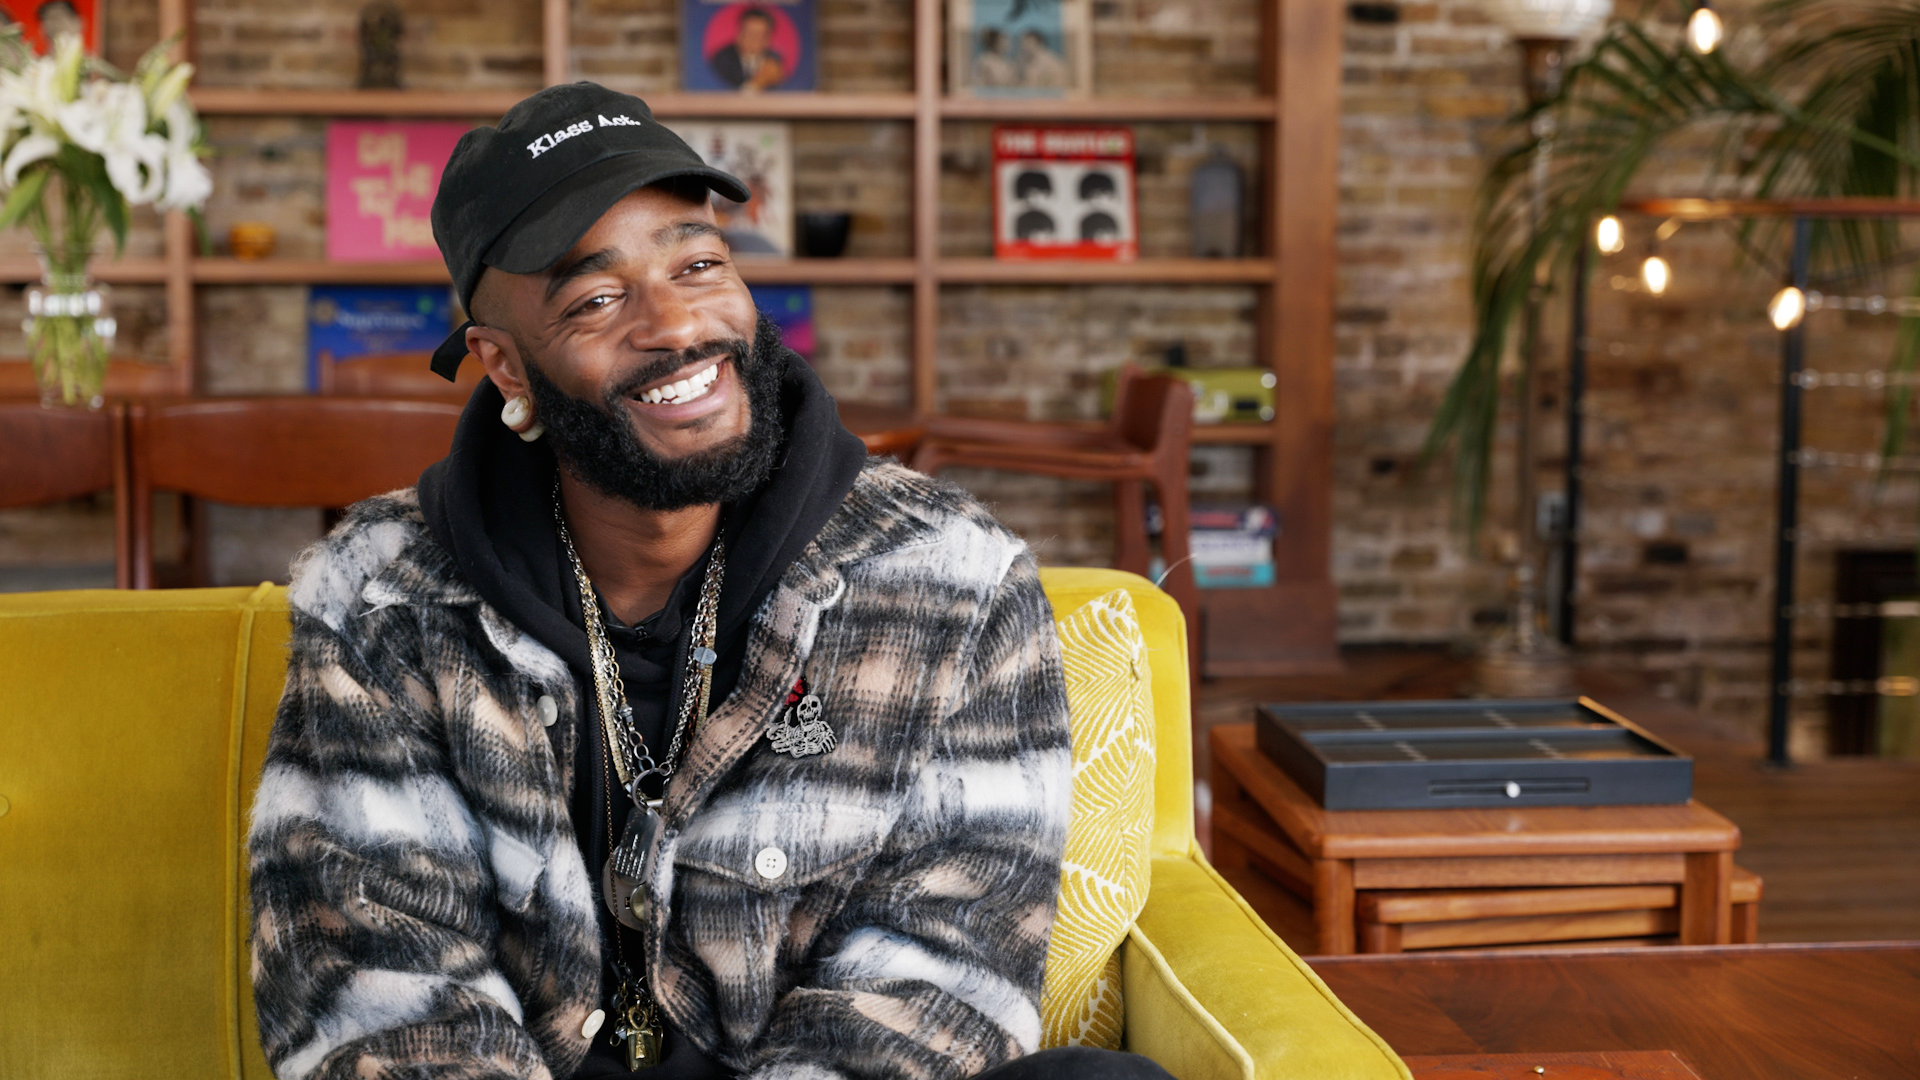 A smiling man with a beard wearing a black cap labeled 'Klass Act', a patterned fur jacket, and gold chains, seated in a cozy room with exposed brick walls, shelves displaying books and artworks, and a wooden coffee table in the foreground. The setting has a warm and welcoming ambiance with hanging lights and indoor plants.